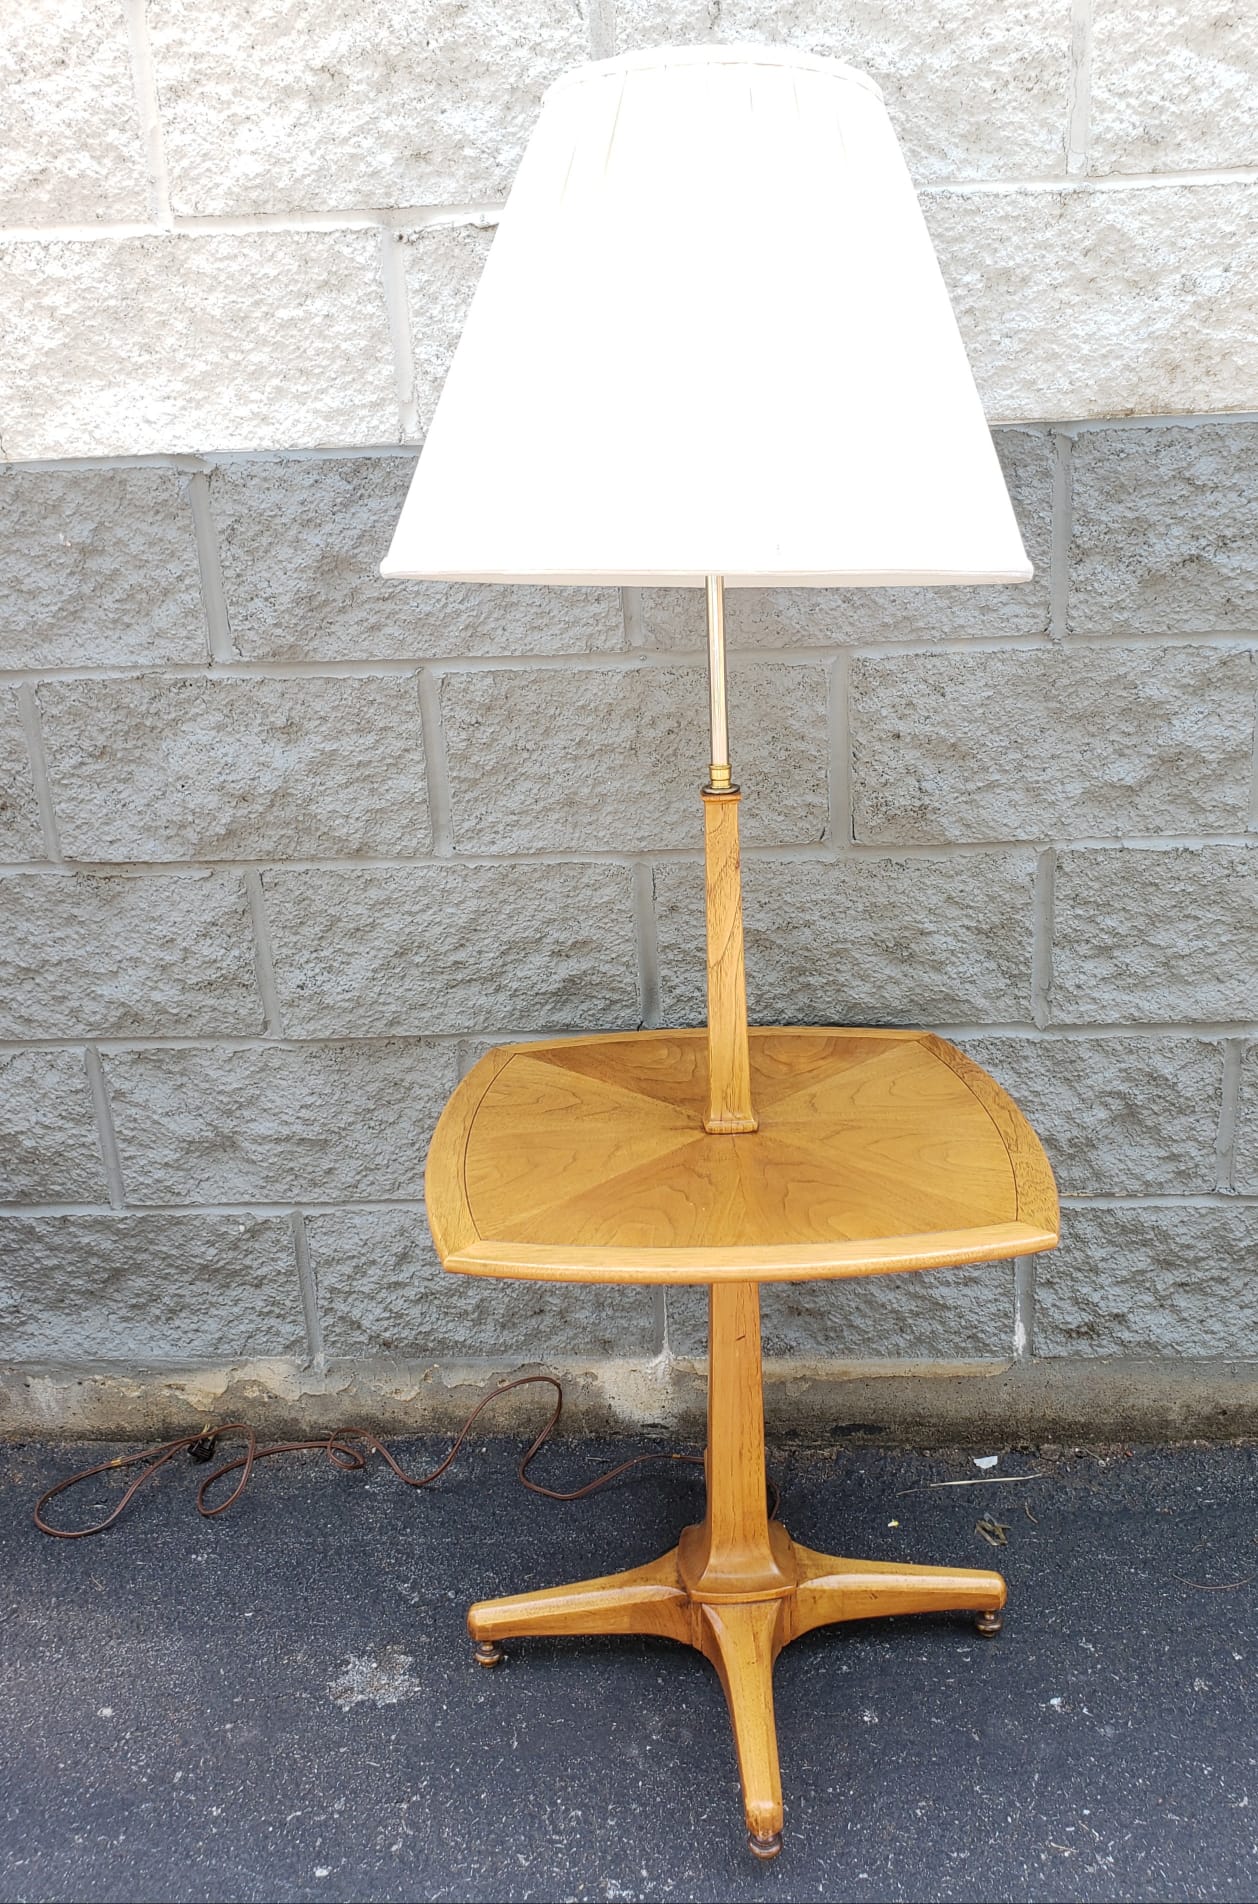 A rare Mid-Century Tomlinson Sophisticate Walnut Torchiere Floor Lamp with Table and milk glass torcchire shade and brass feet.
High quality craftmanship and in great vintage condition.  Comes with milk glass shade. No textile shade. Measures 21